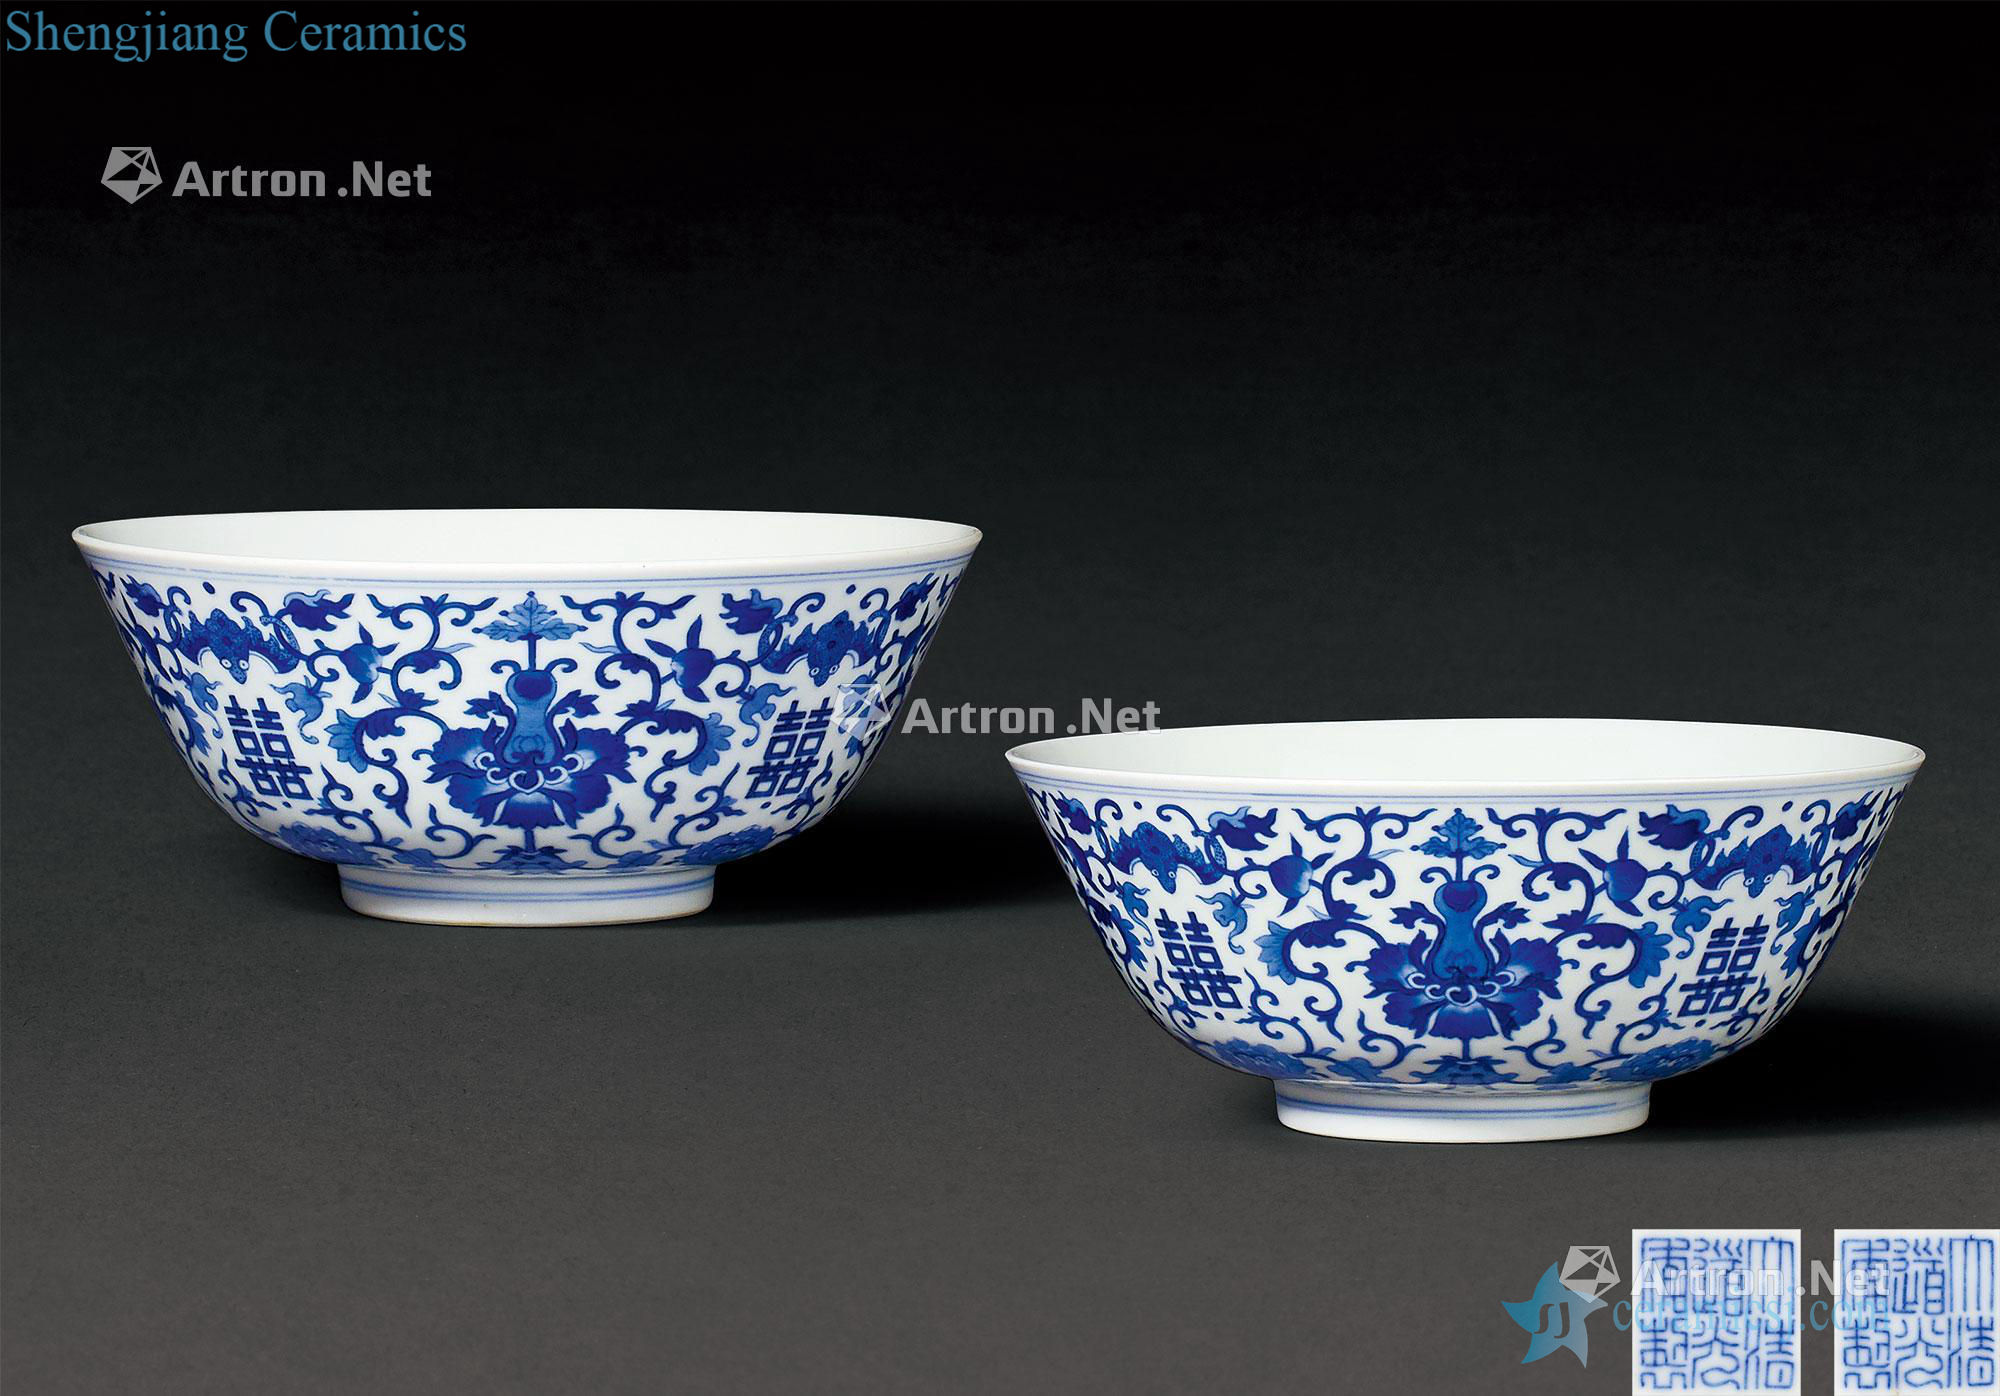 Qing daoguang Blue and white tie up branch passionflower live double happiness green-splashed bowls (a)